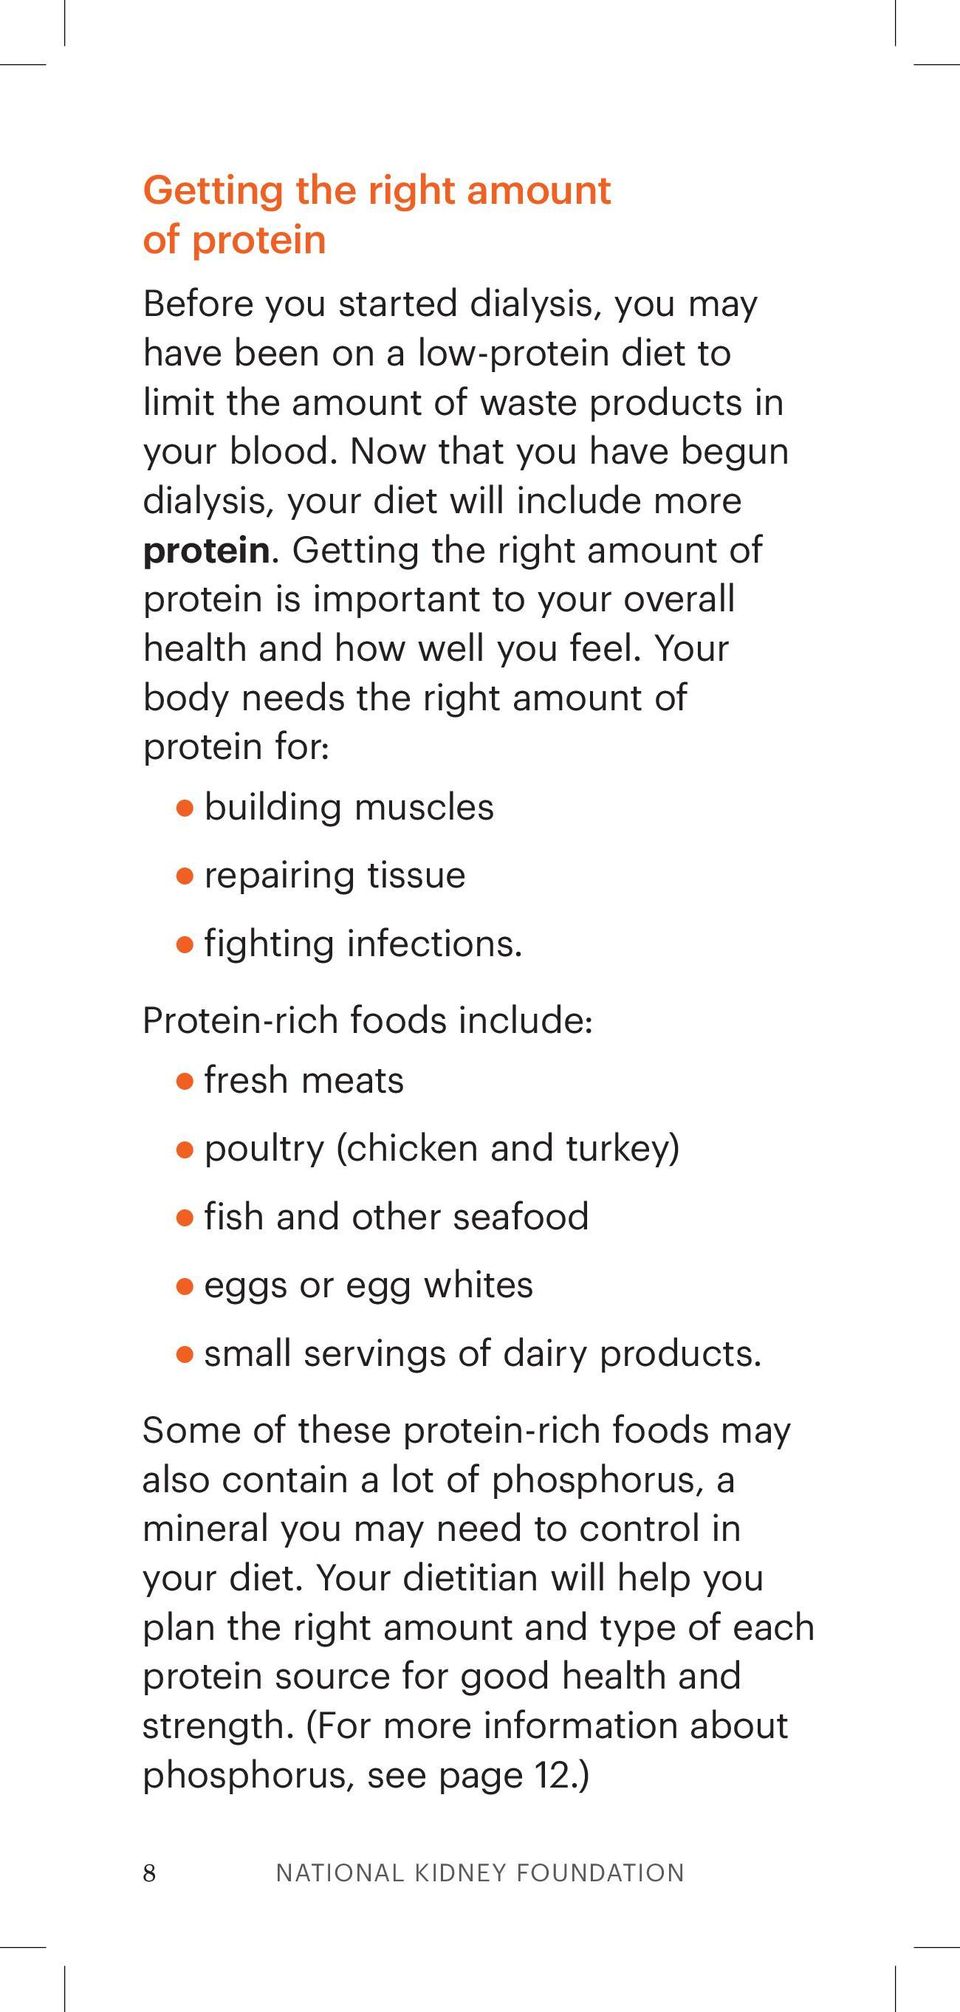 Your body needs the right amount of protein for: building muscles repairing tissue fighting infections.